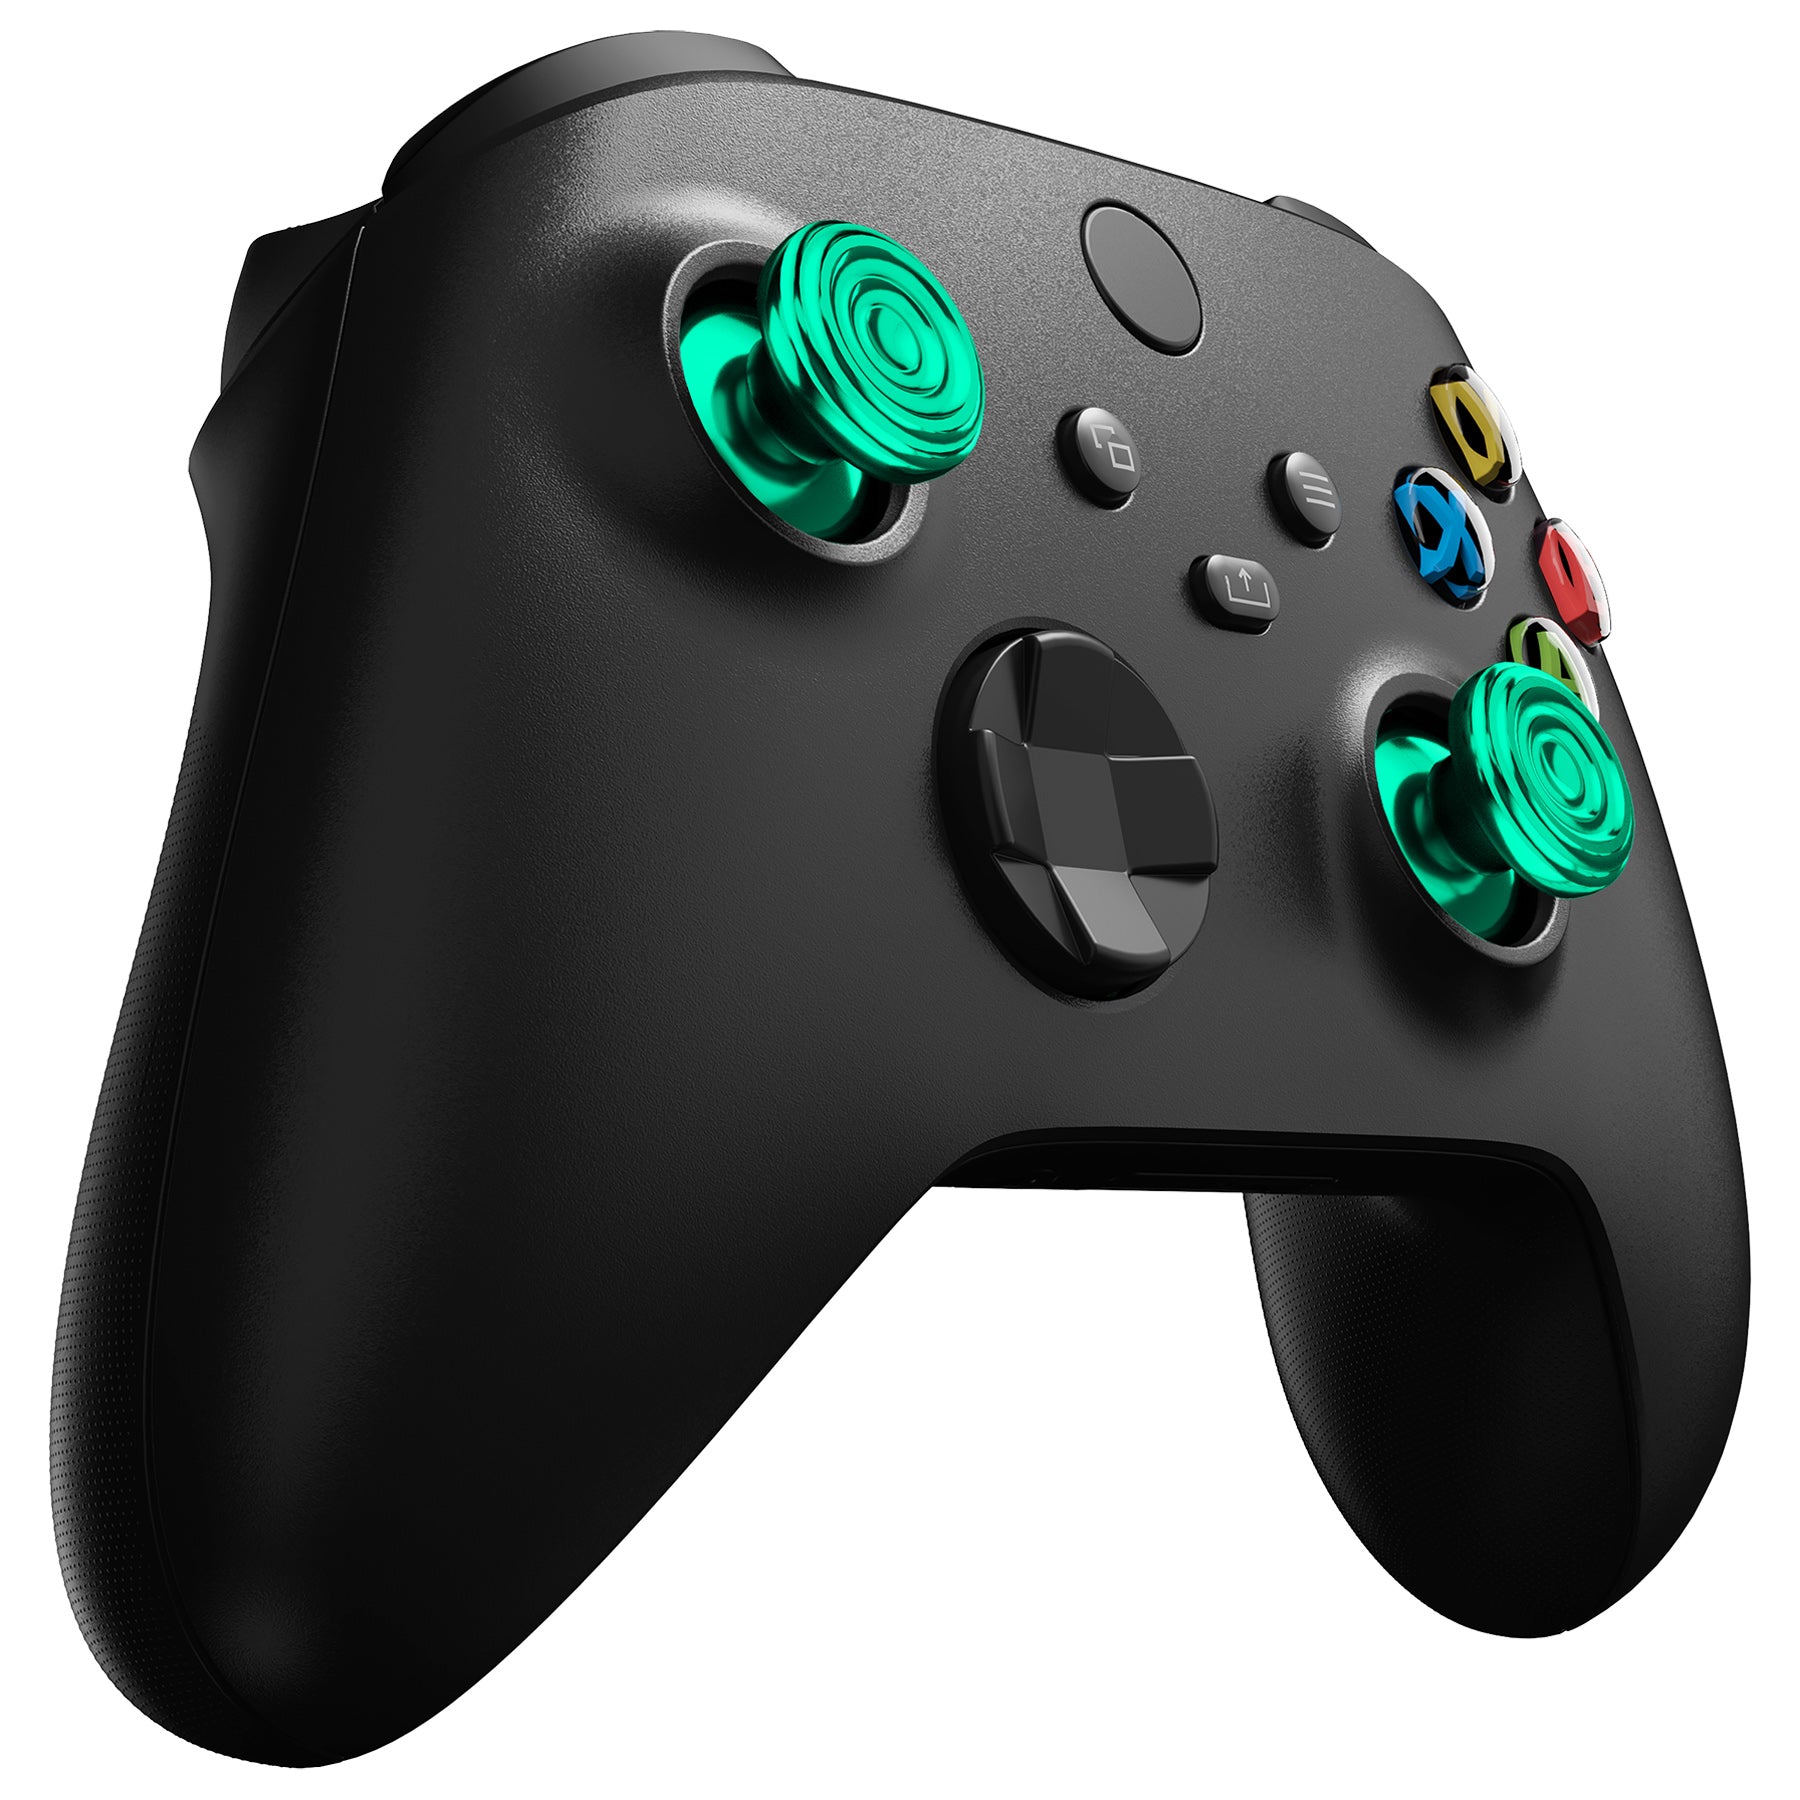 Custom Xbox Elite Controller Series 2 Compatible With Xbox One, Xbox Series X, Xbox Series S. All Original Accessories Included. Customized In Usa By